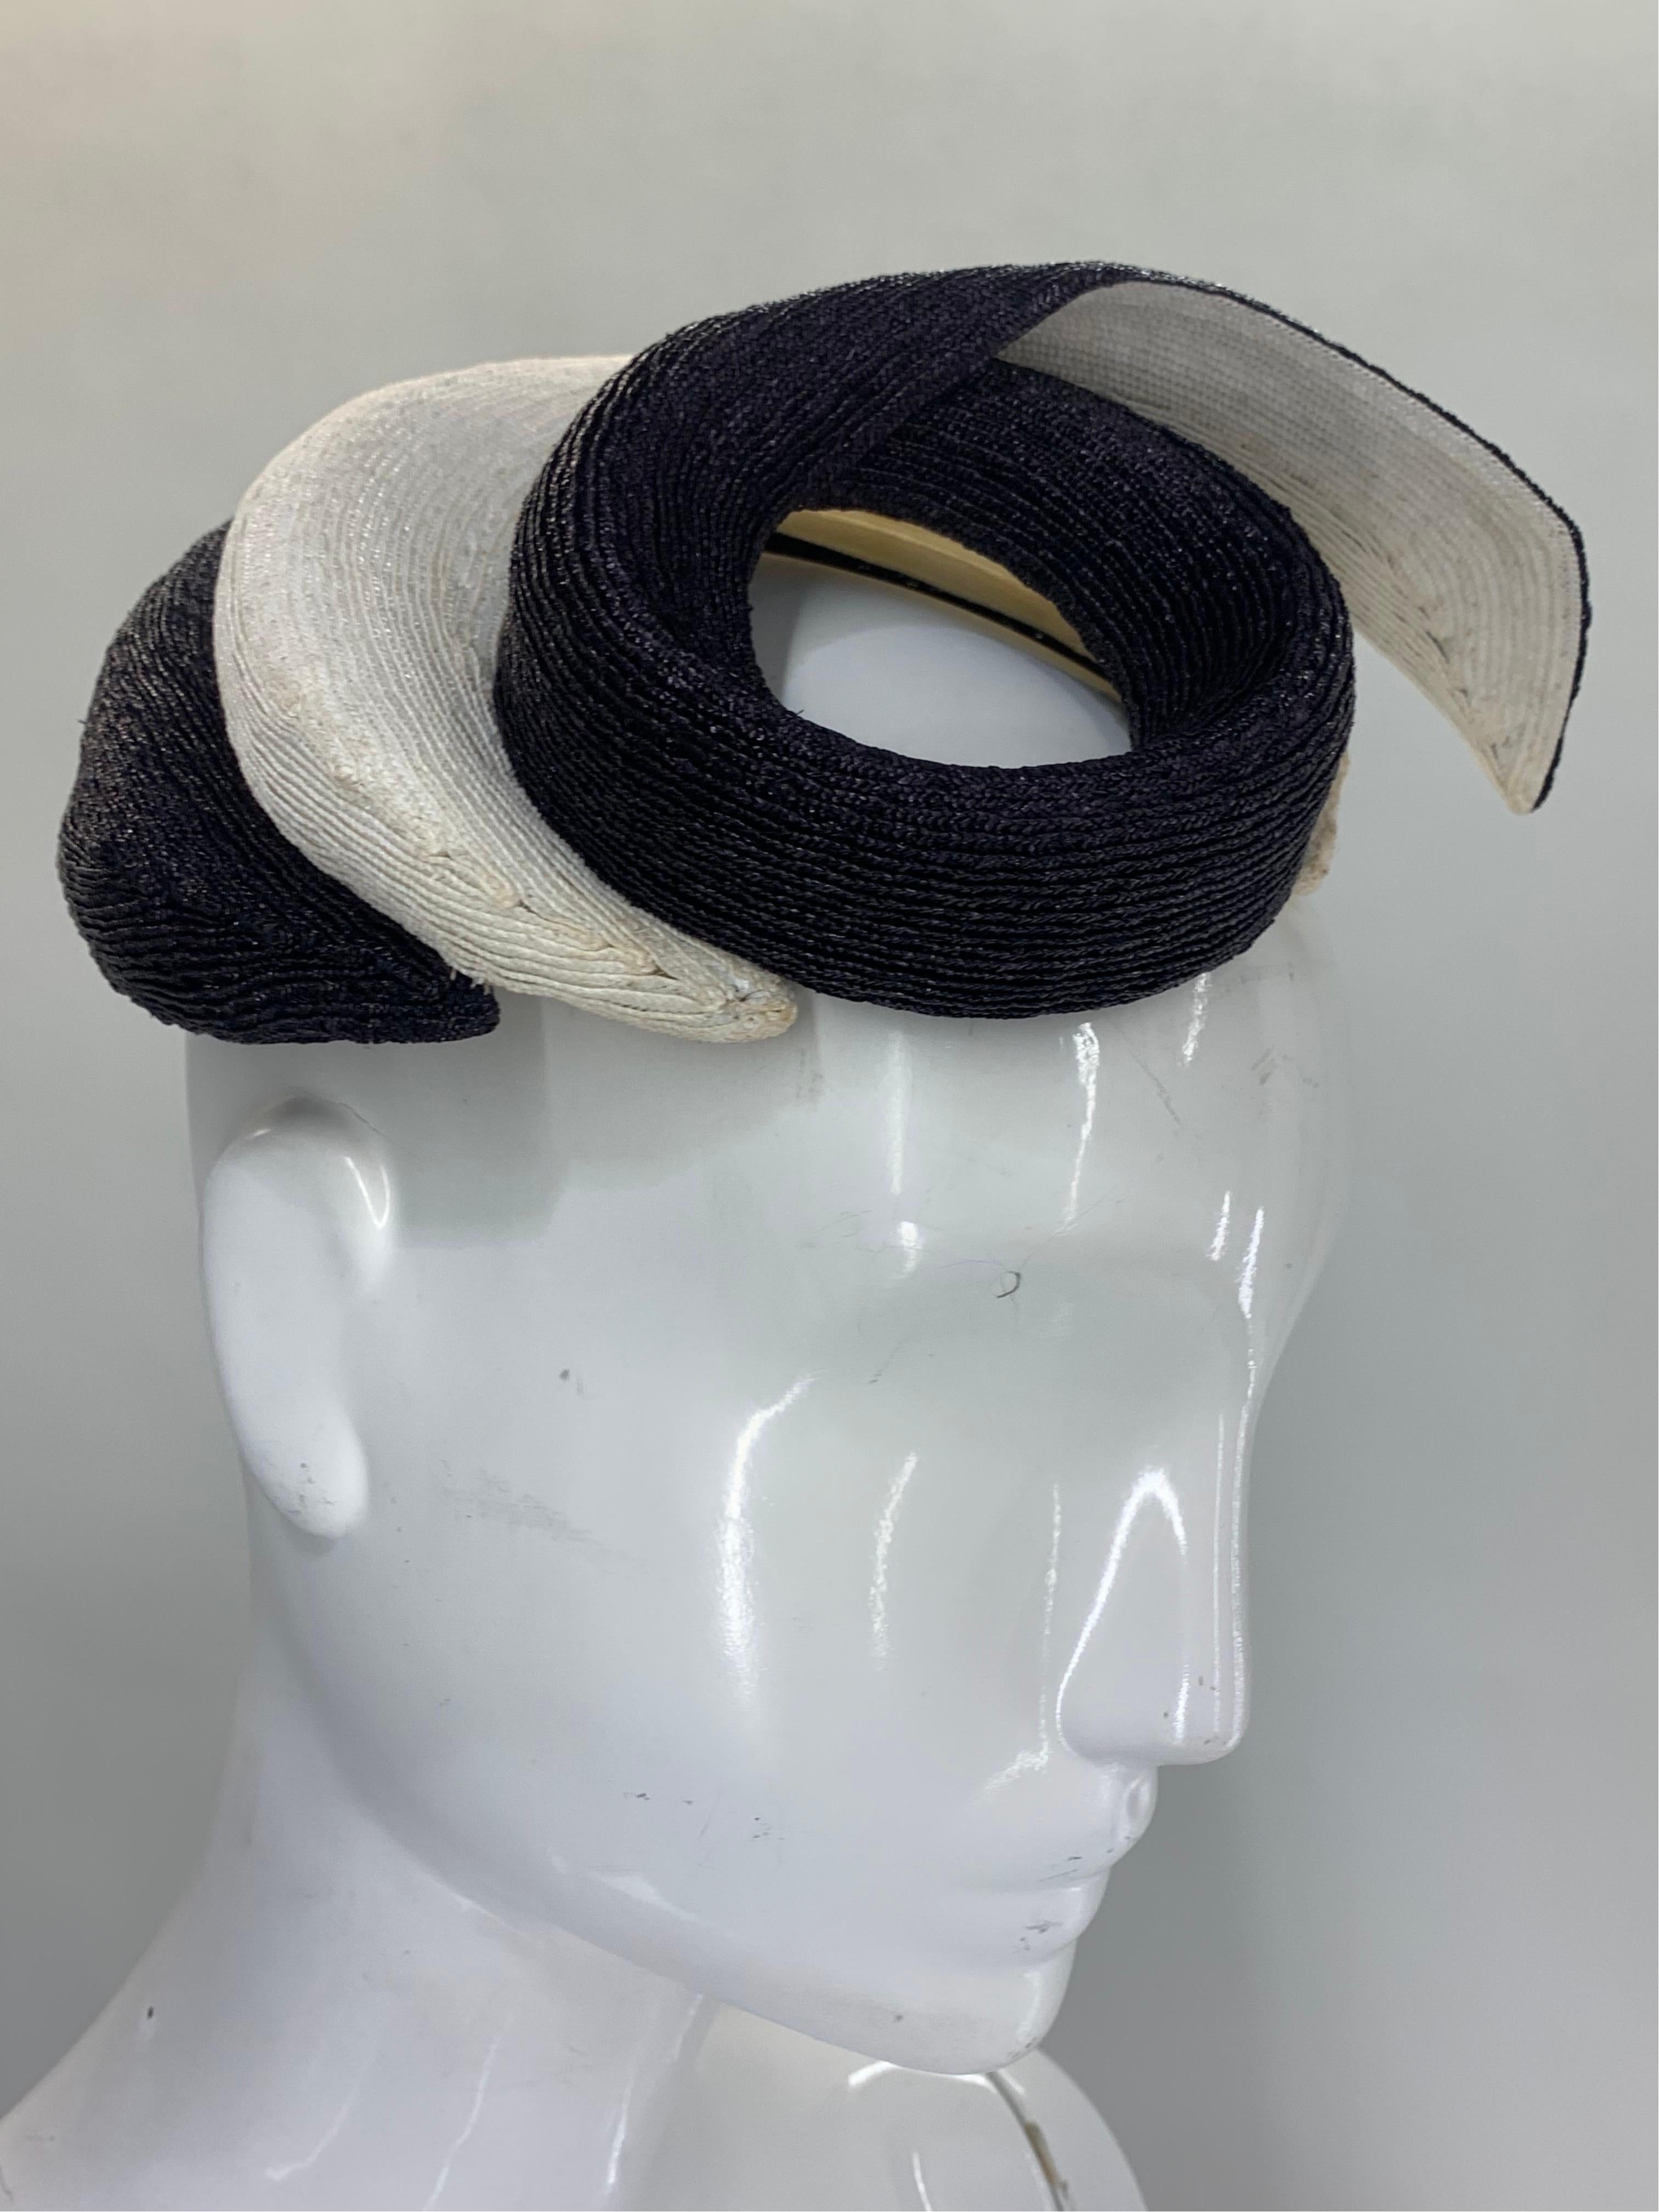 A fabulous 1950s Janette Colombier - Paris navy and cream spiral or corkscrew shaped straw hat or fascinator with a final standout flourish at top!  Original navy silk veil is unattached and can be worn with or without. Classic chic Jubilee-style!